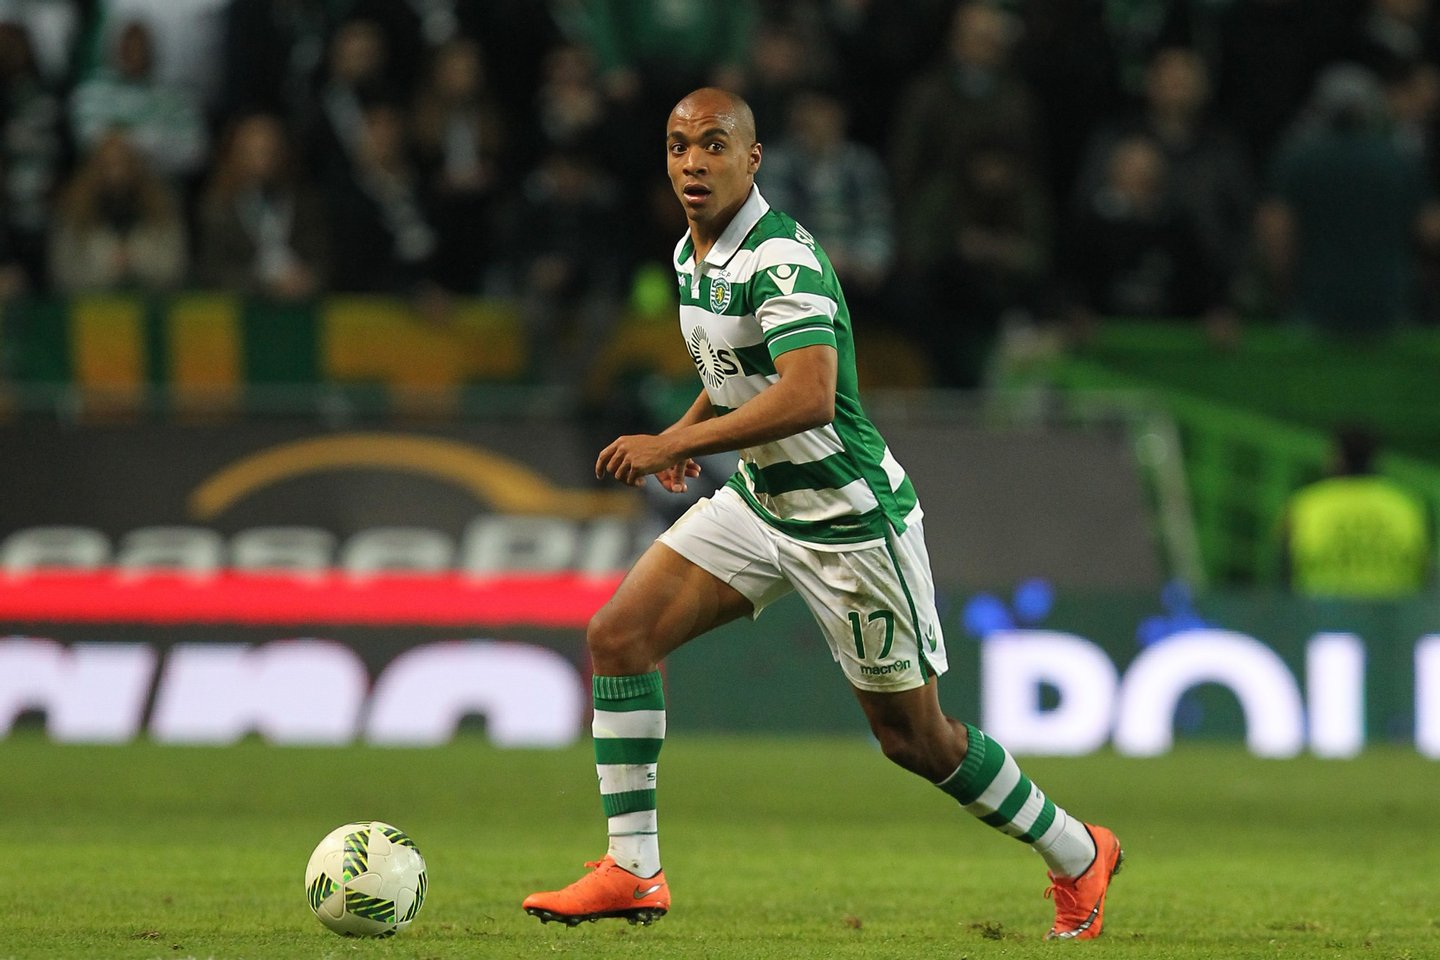 LISBON, PORTUGAL - FEBRUARY 22: Sporting's midfielder Joao Mario during the match between Sporting CP and Boavista FC for the Portuguese Primeira Liga at Jose Alvalade Stadium on February 22, 2016 in Lisbon, Portugal. (Photo by Carlos Rodrigues/Getty Images)